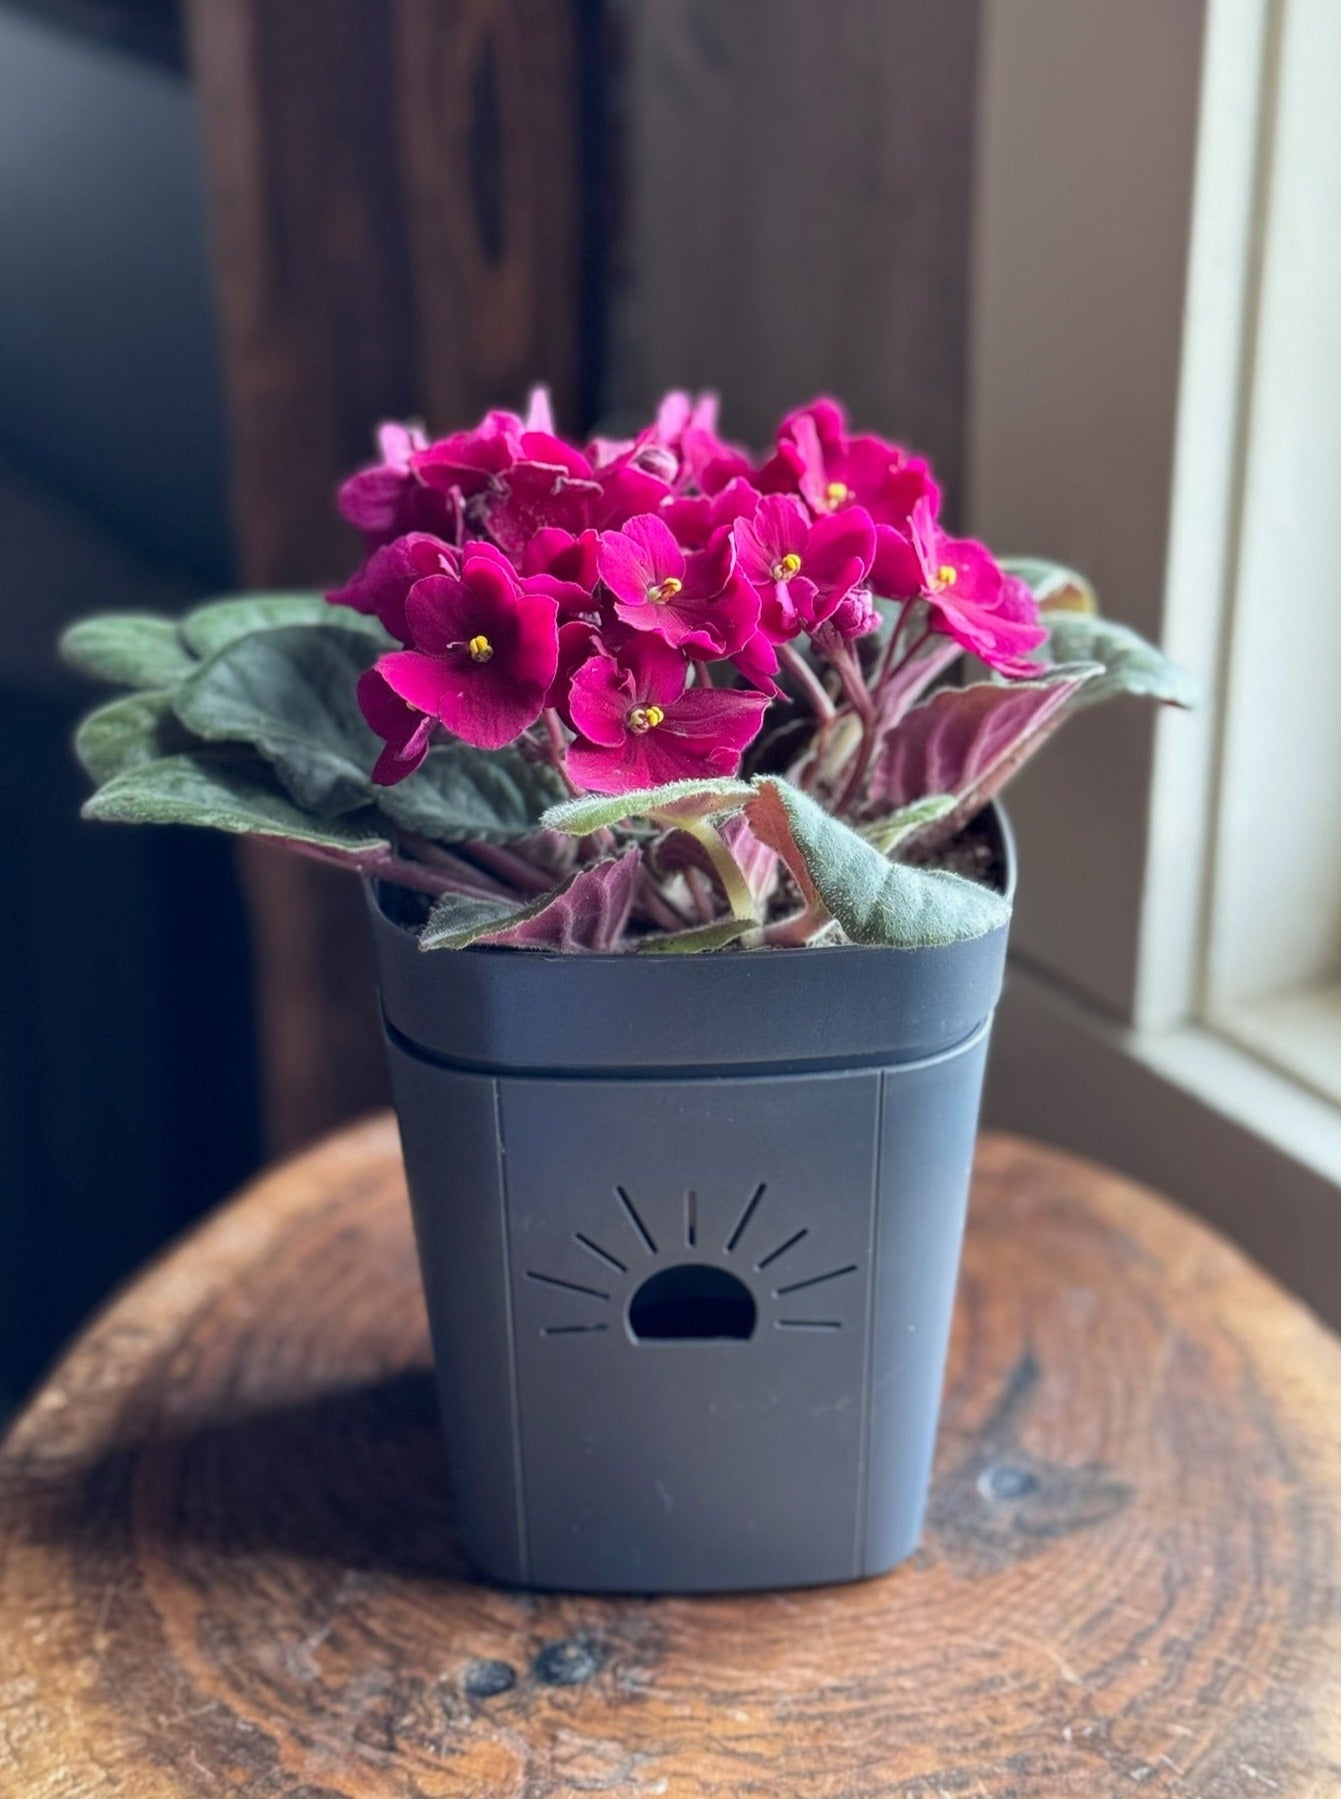 5" Planter with African Violet